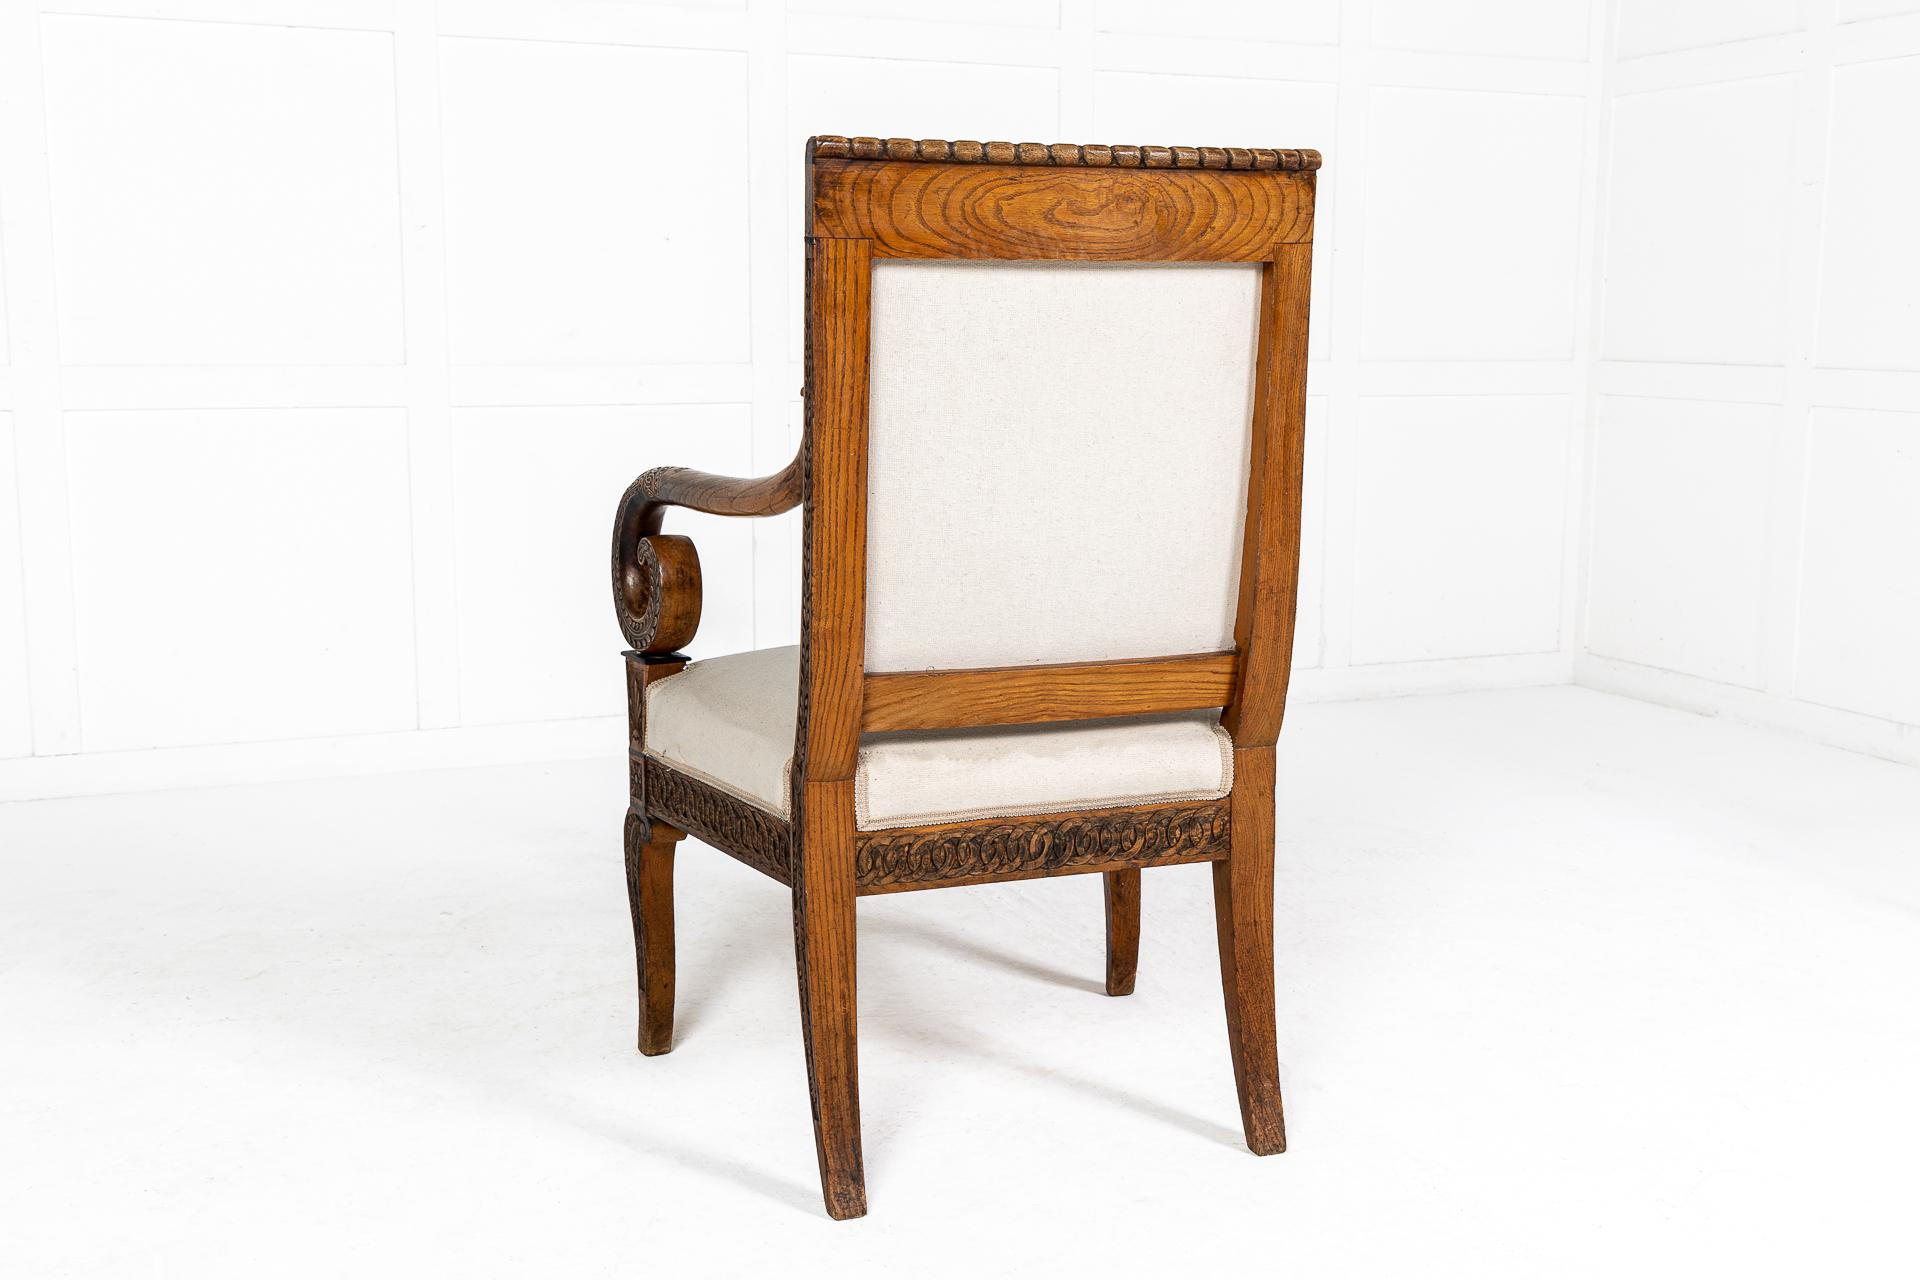 Matched Pair of 19th Century French Carved Wood Chairs For Sale 4